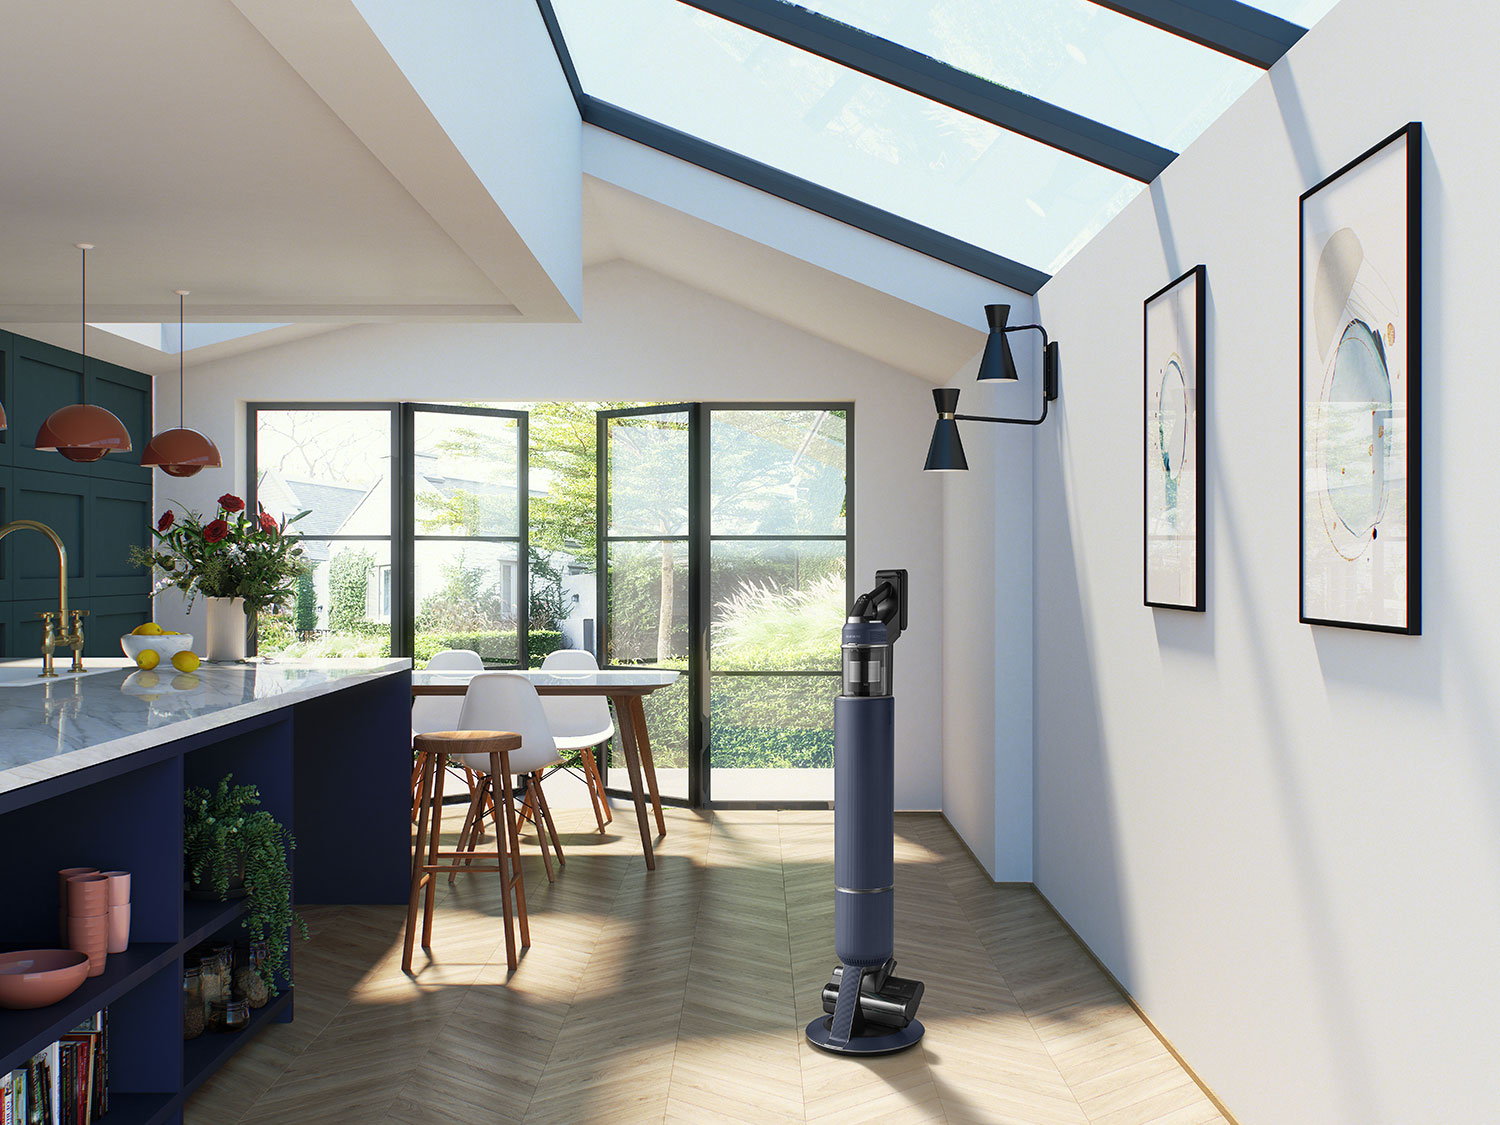 Samsung Bespoke Jet Stick Vacuum Cleaner in a sunny space